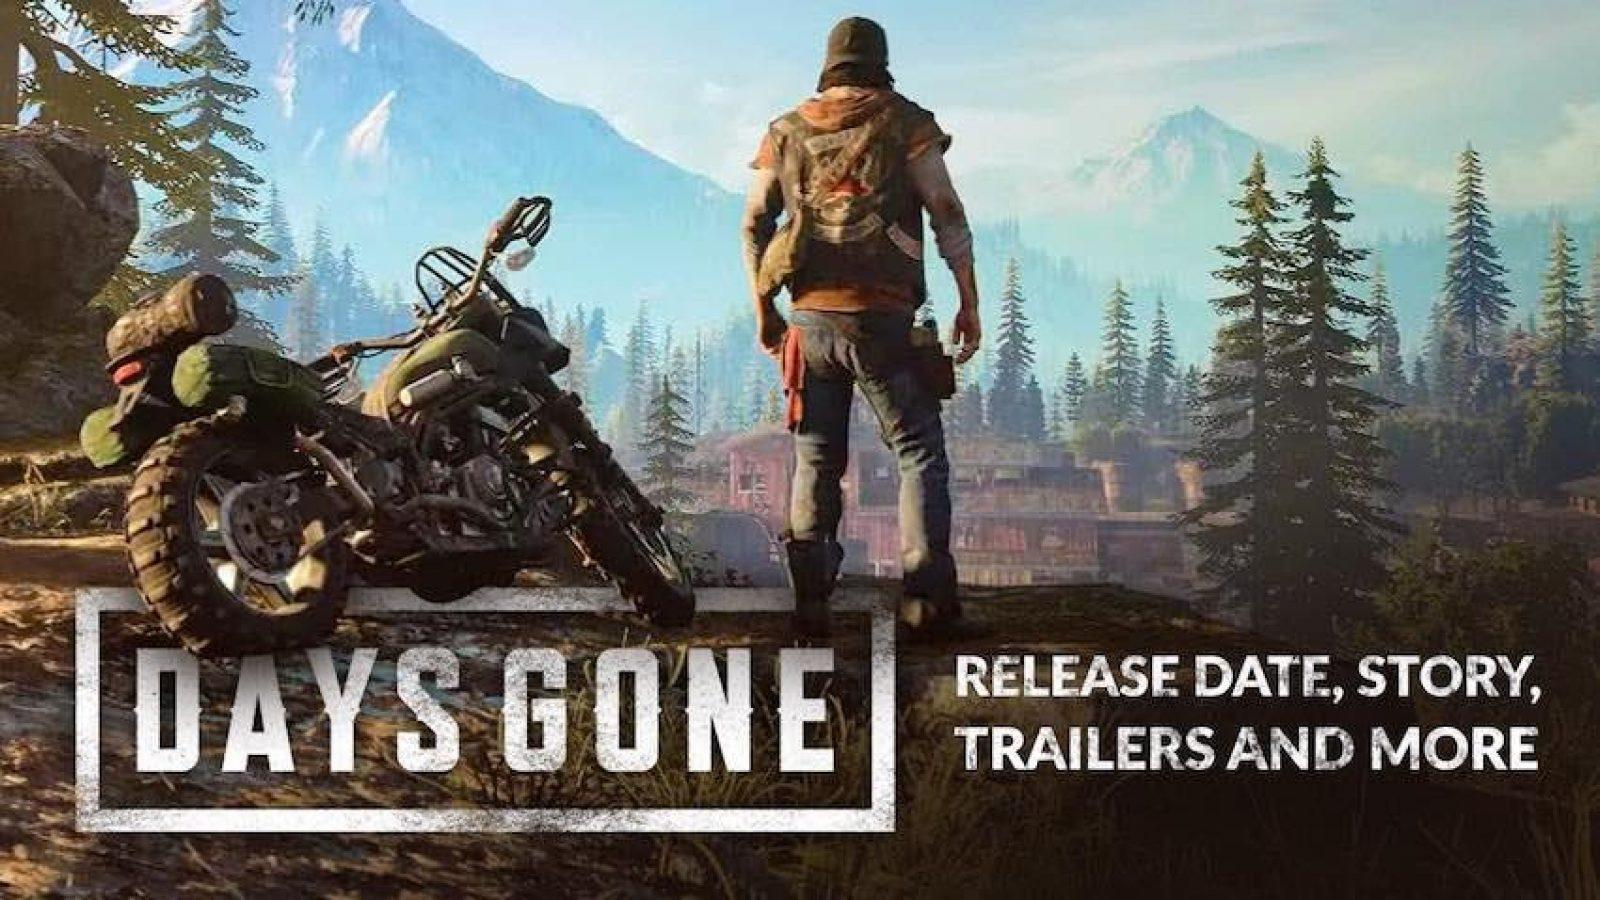 Review: Sony's new 'Days Gone' PS4 game brings a zombie apocalypse